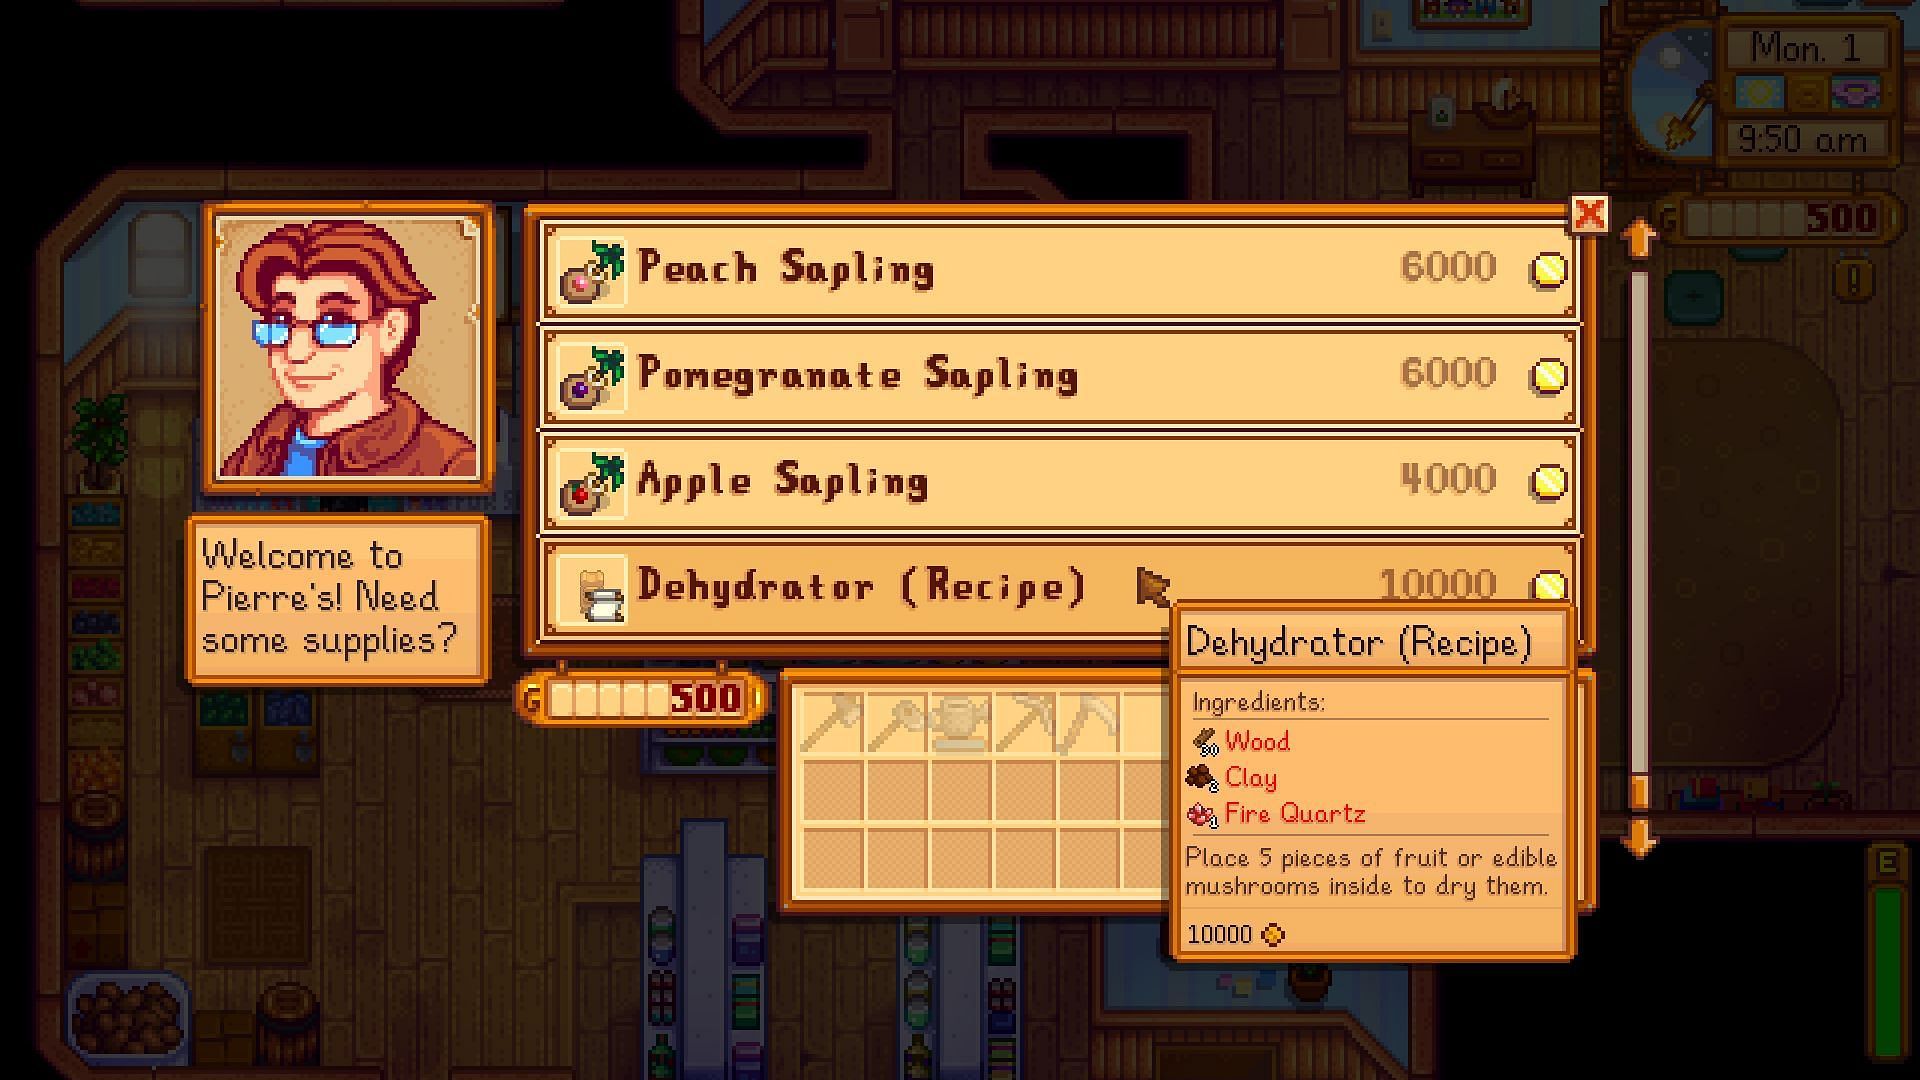 Purchase the Dehydrator recipe for 10000g (Image via ConcernedApe)